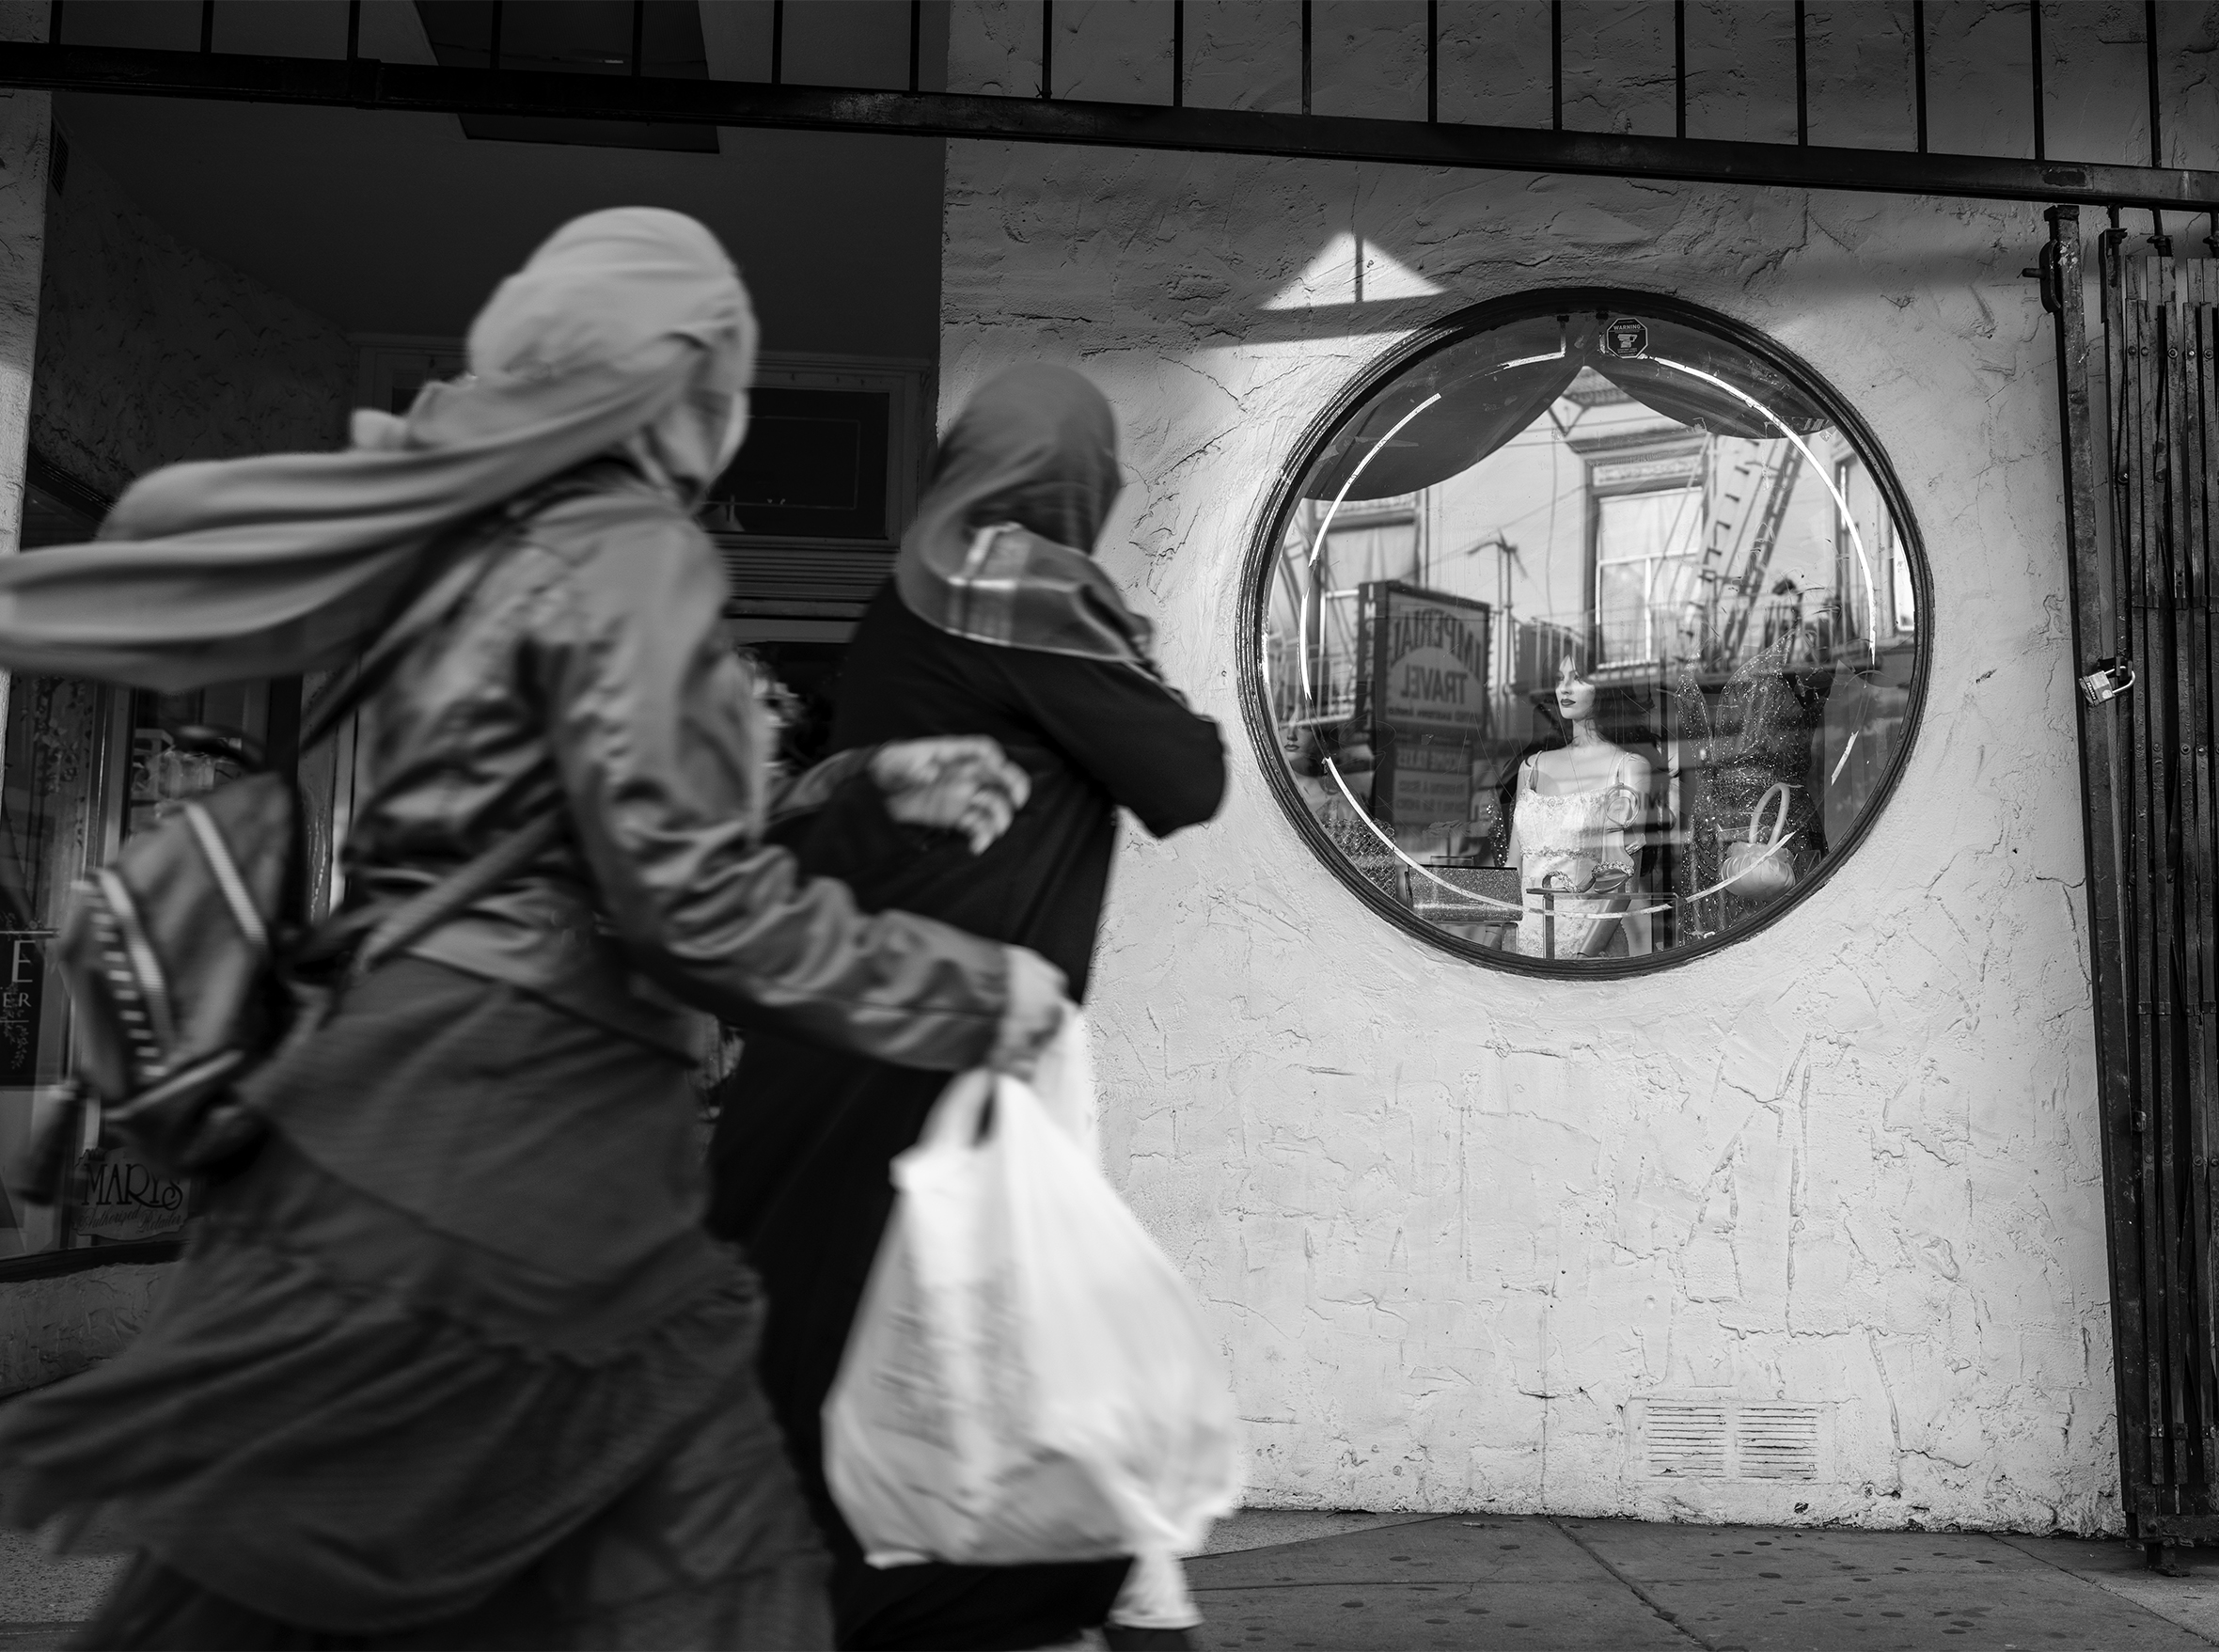 Two women in headscarves window-shop on Mission Boulevard in San Francisco. They walk by a women’s clothing store with a circular window displaying evening purses, strappy sandals, and mannequins in dresses.